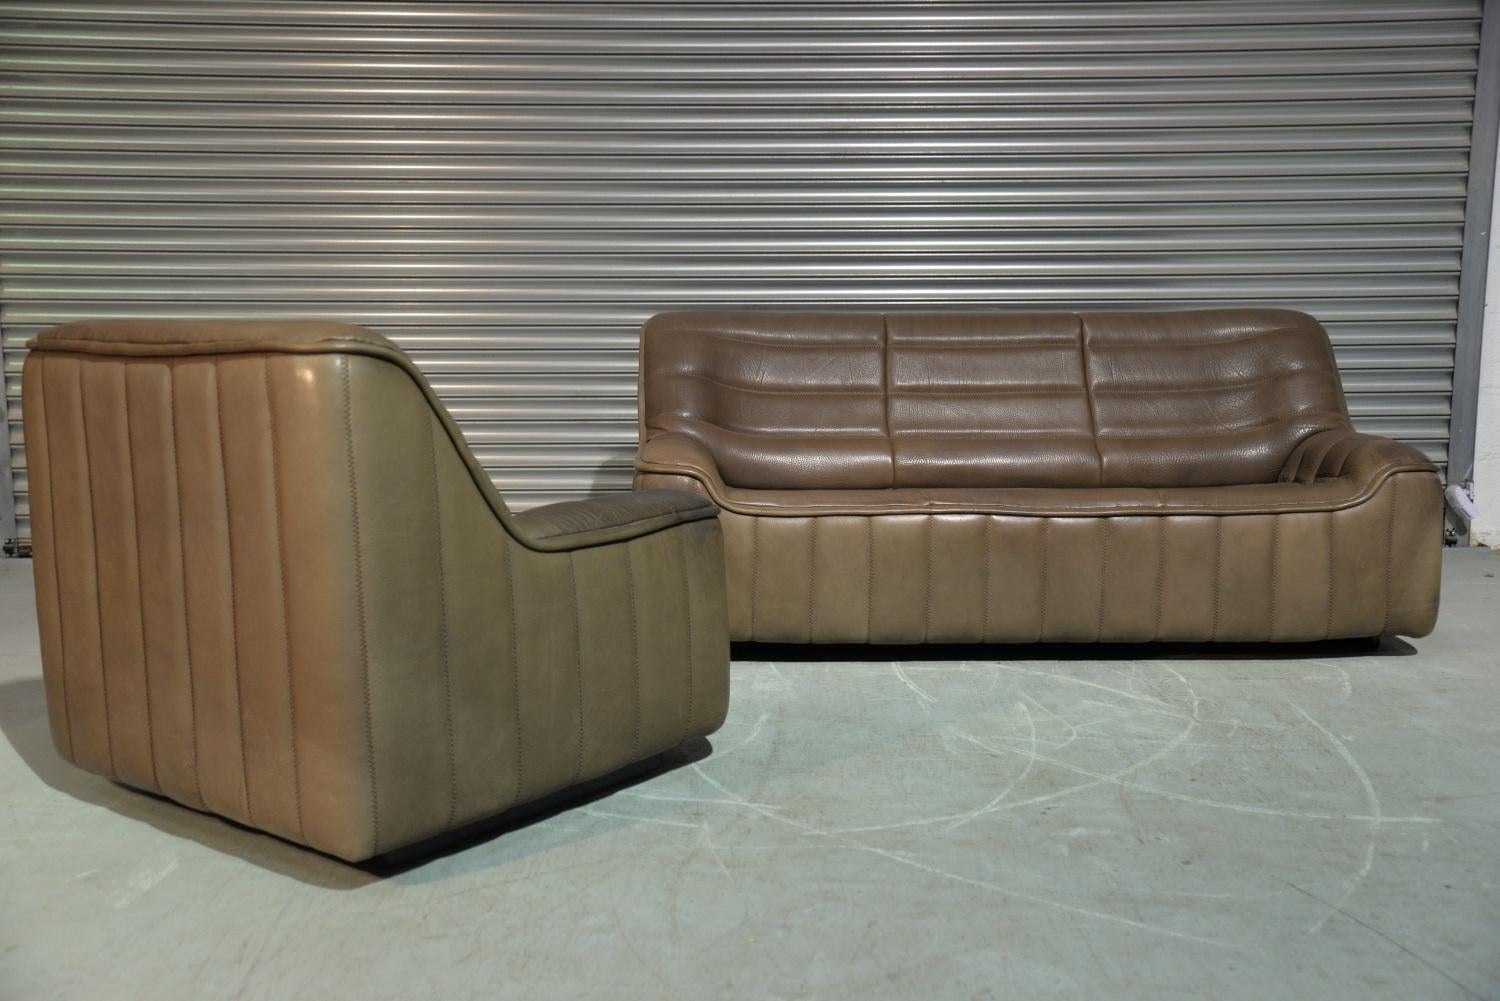 Discounted airfreight for our US and International customers (from 2 weeks door to door)

An ultra rare vintage De Sede DS 84 3-seat sofa and matching armchair. Hand built in the 1970s by de Sede craftsman in Switzerland, these pieces are